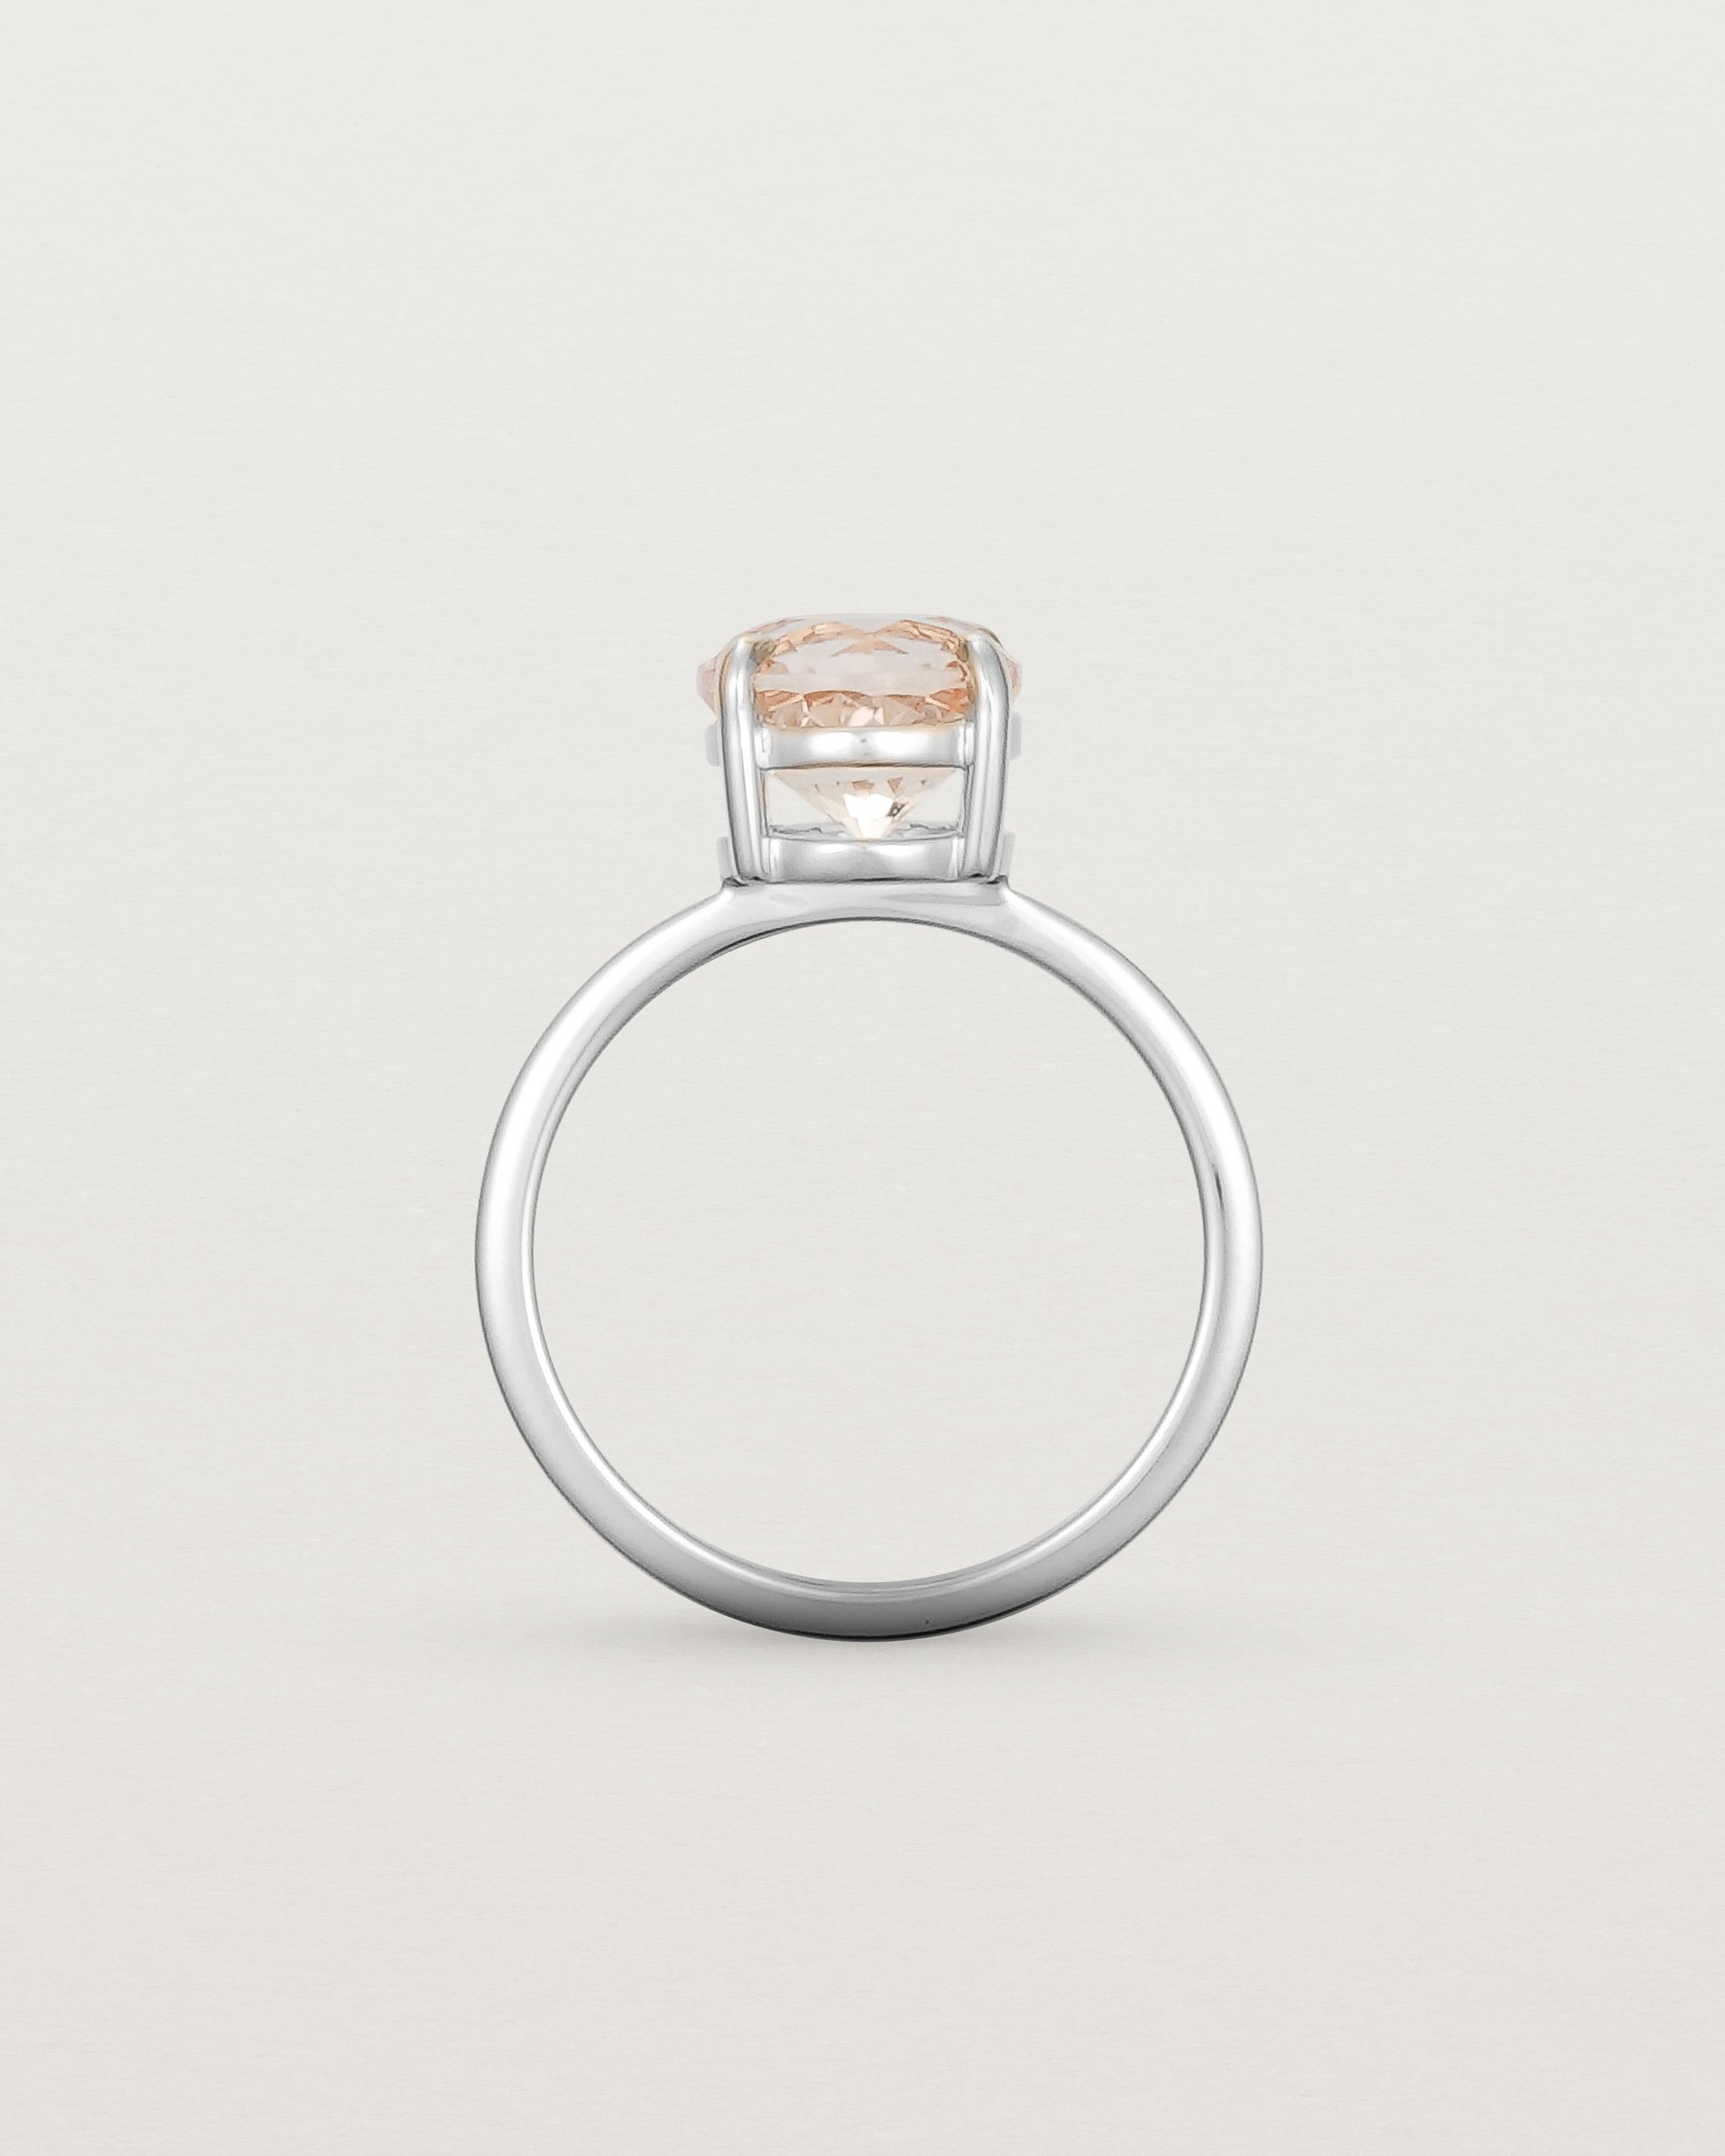 Standing view of the Una Round Solitaire | Morganite | Yellow Gold